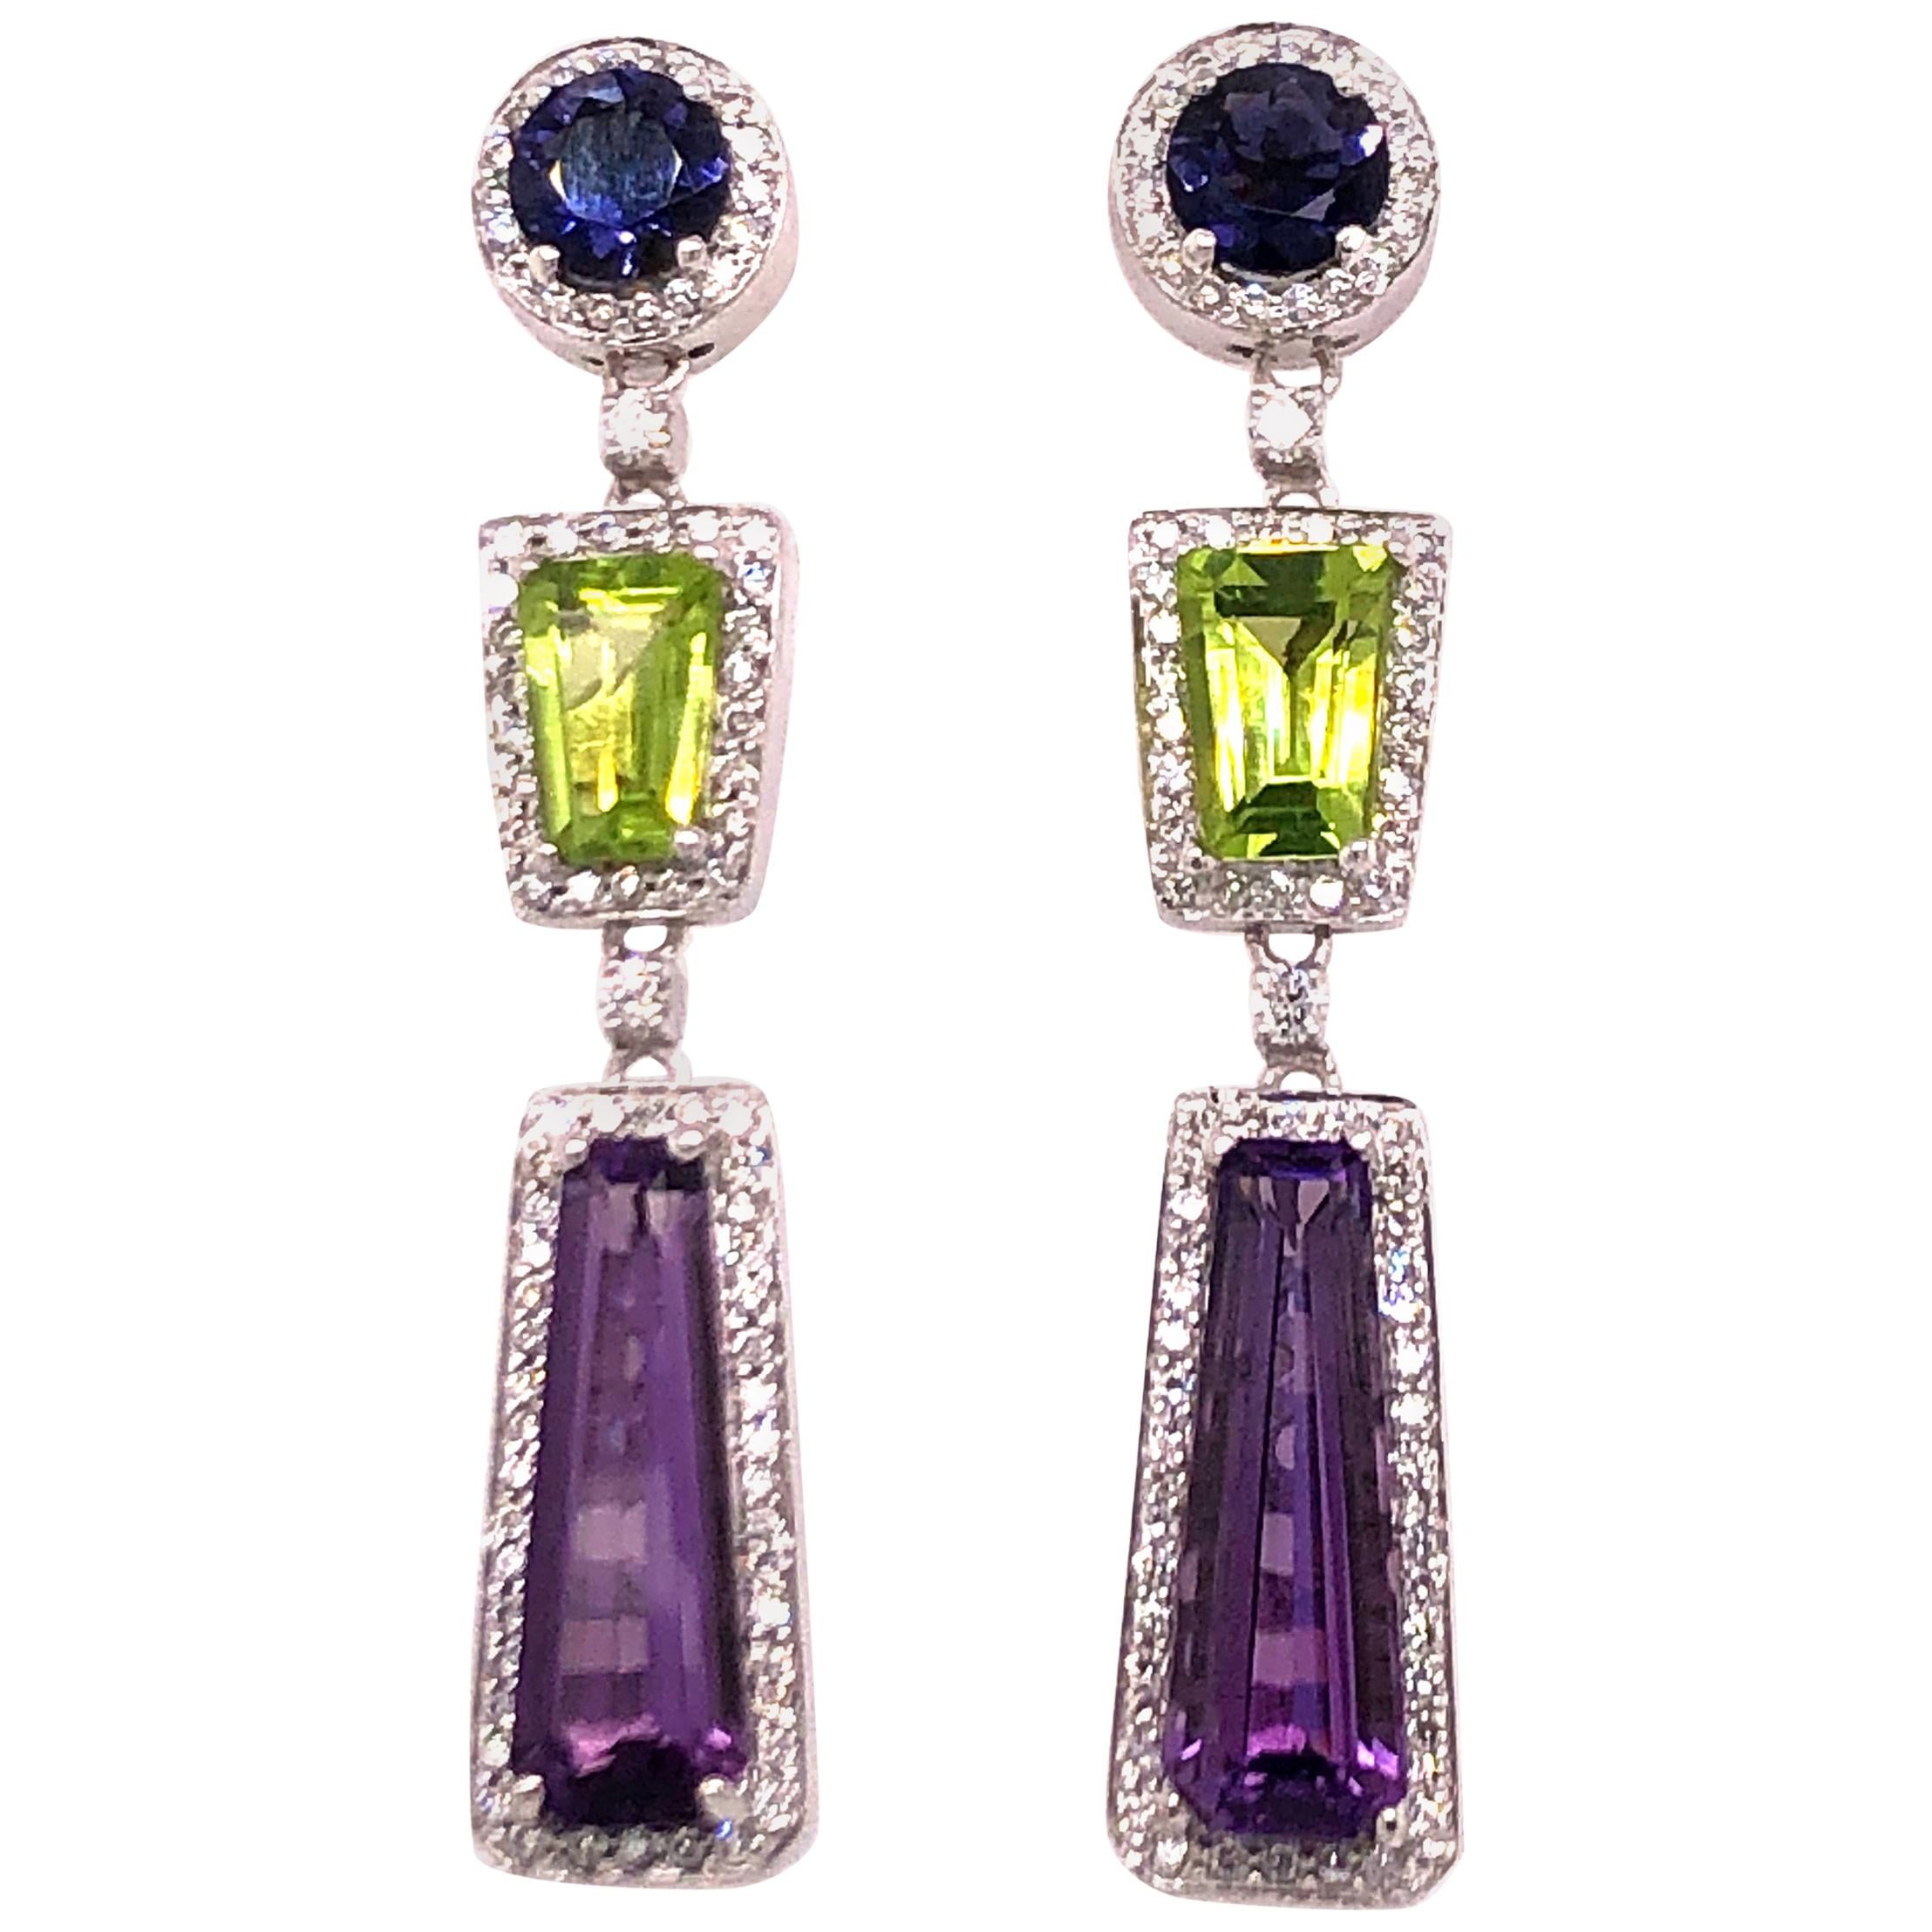 White Gold Multicolored Stone and Diamond Earrings